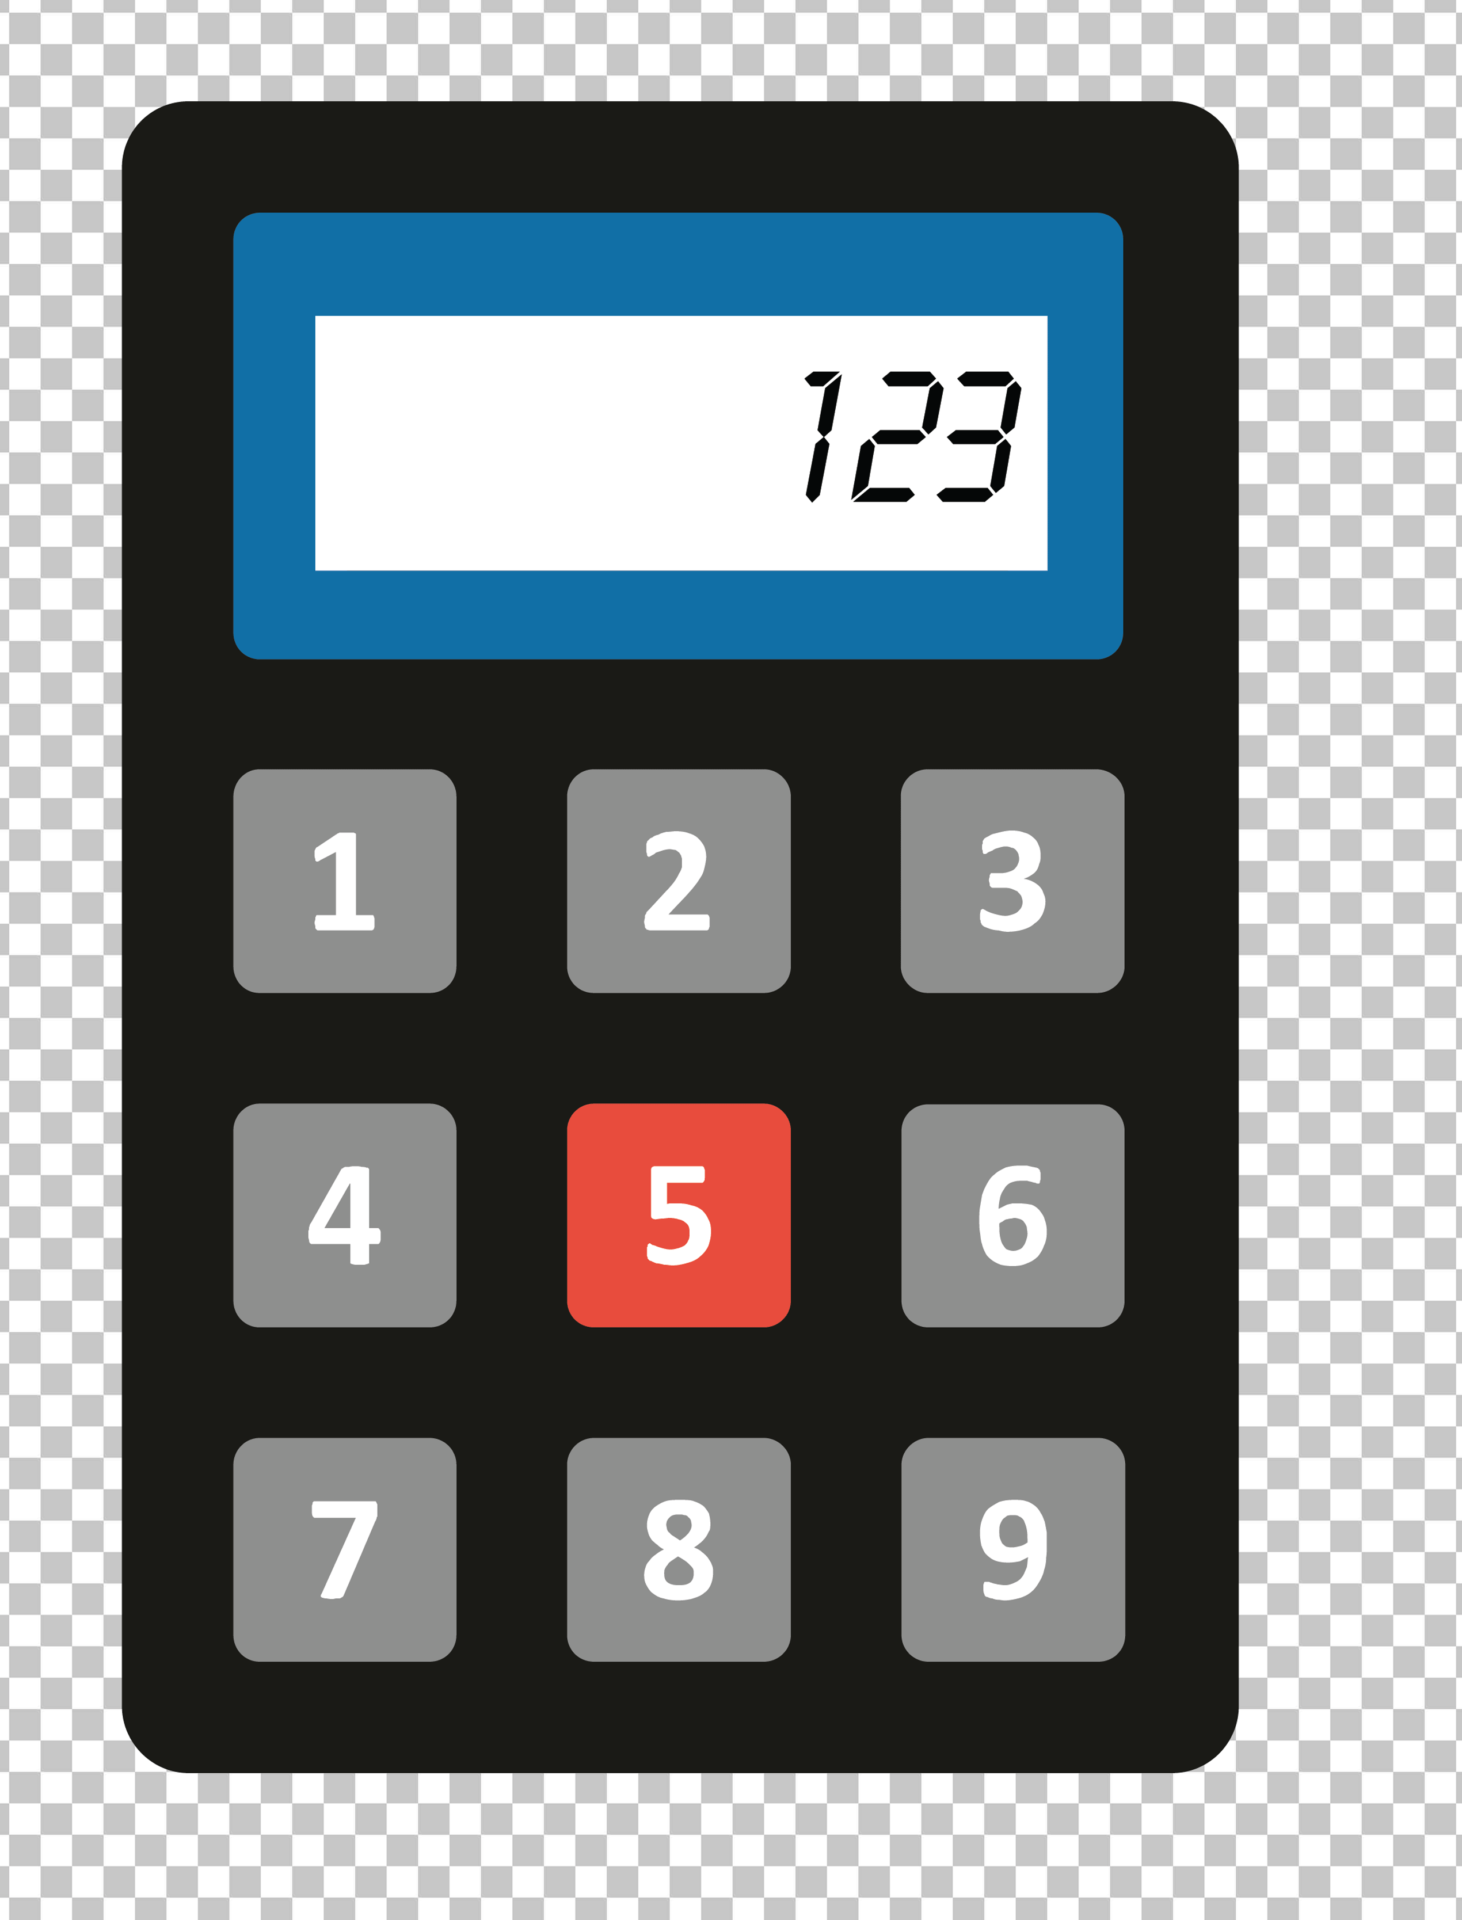 Black calculator with red button PNG Image